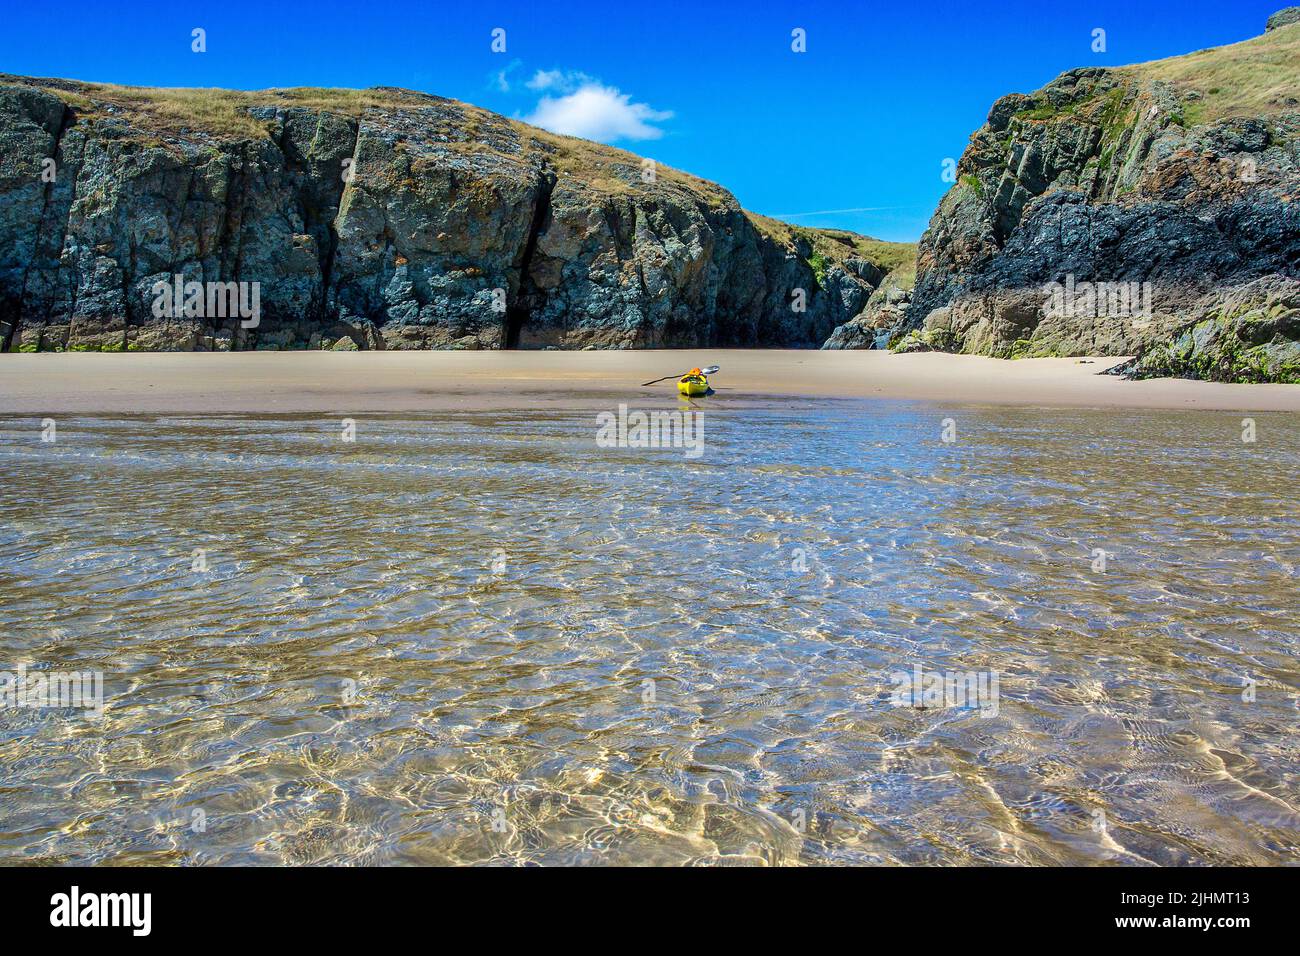 Sea kayaking / canoeing at Maltraeth on the coast of Anglesey, North Wales, UK Stock Photo